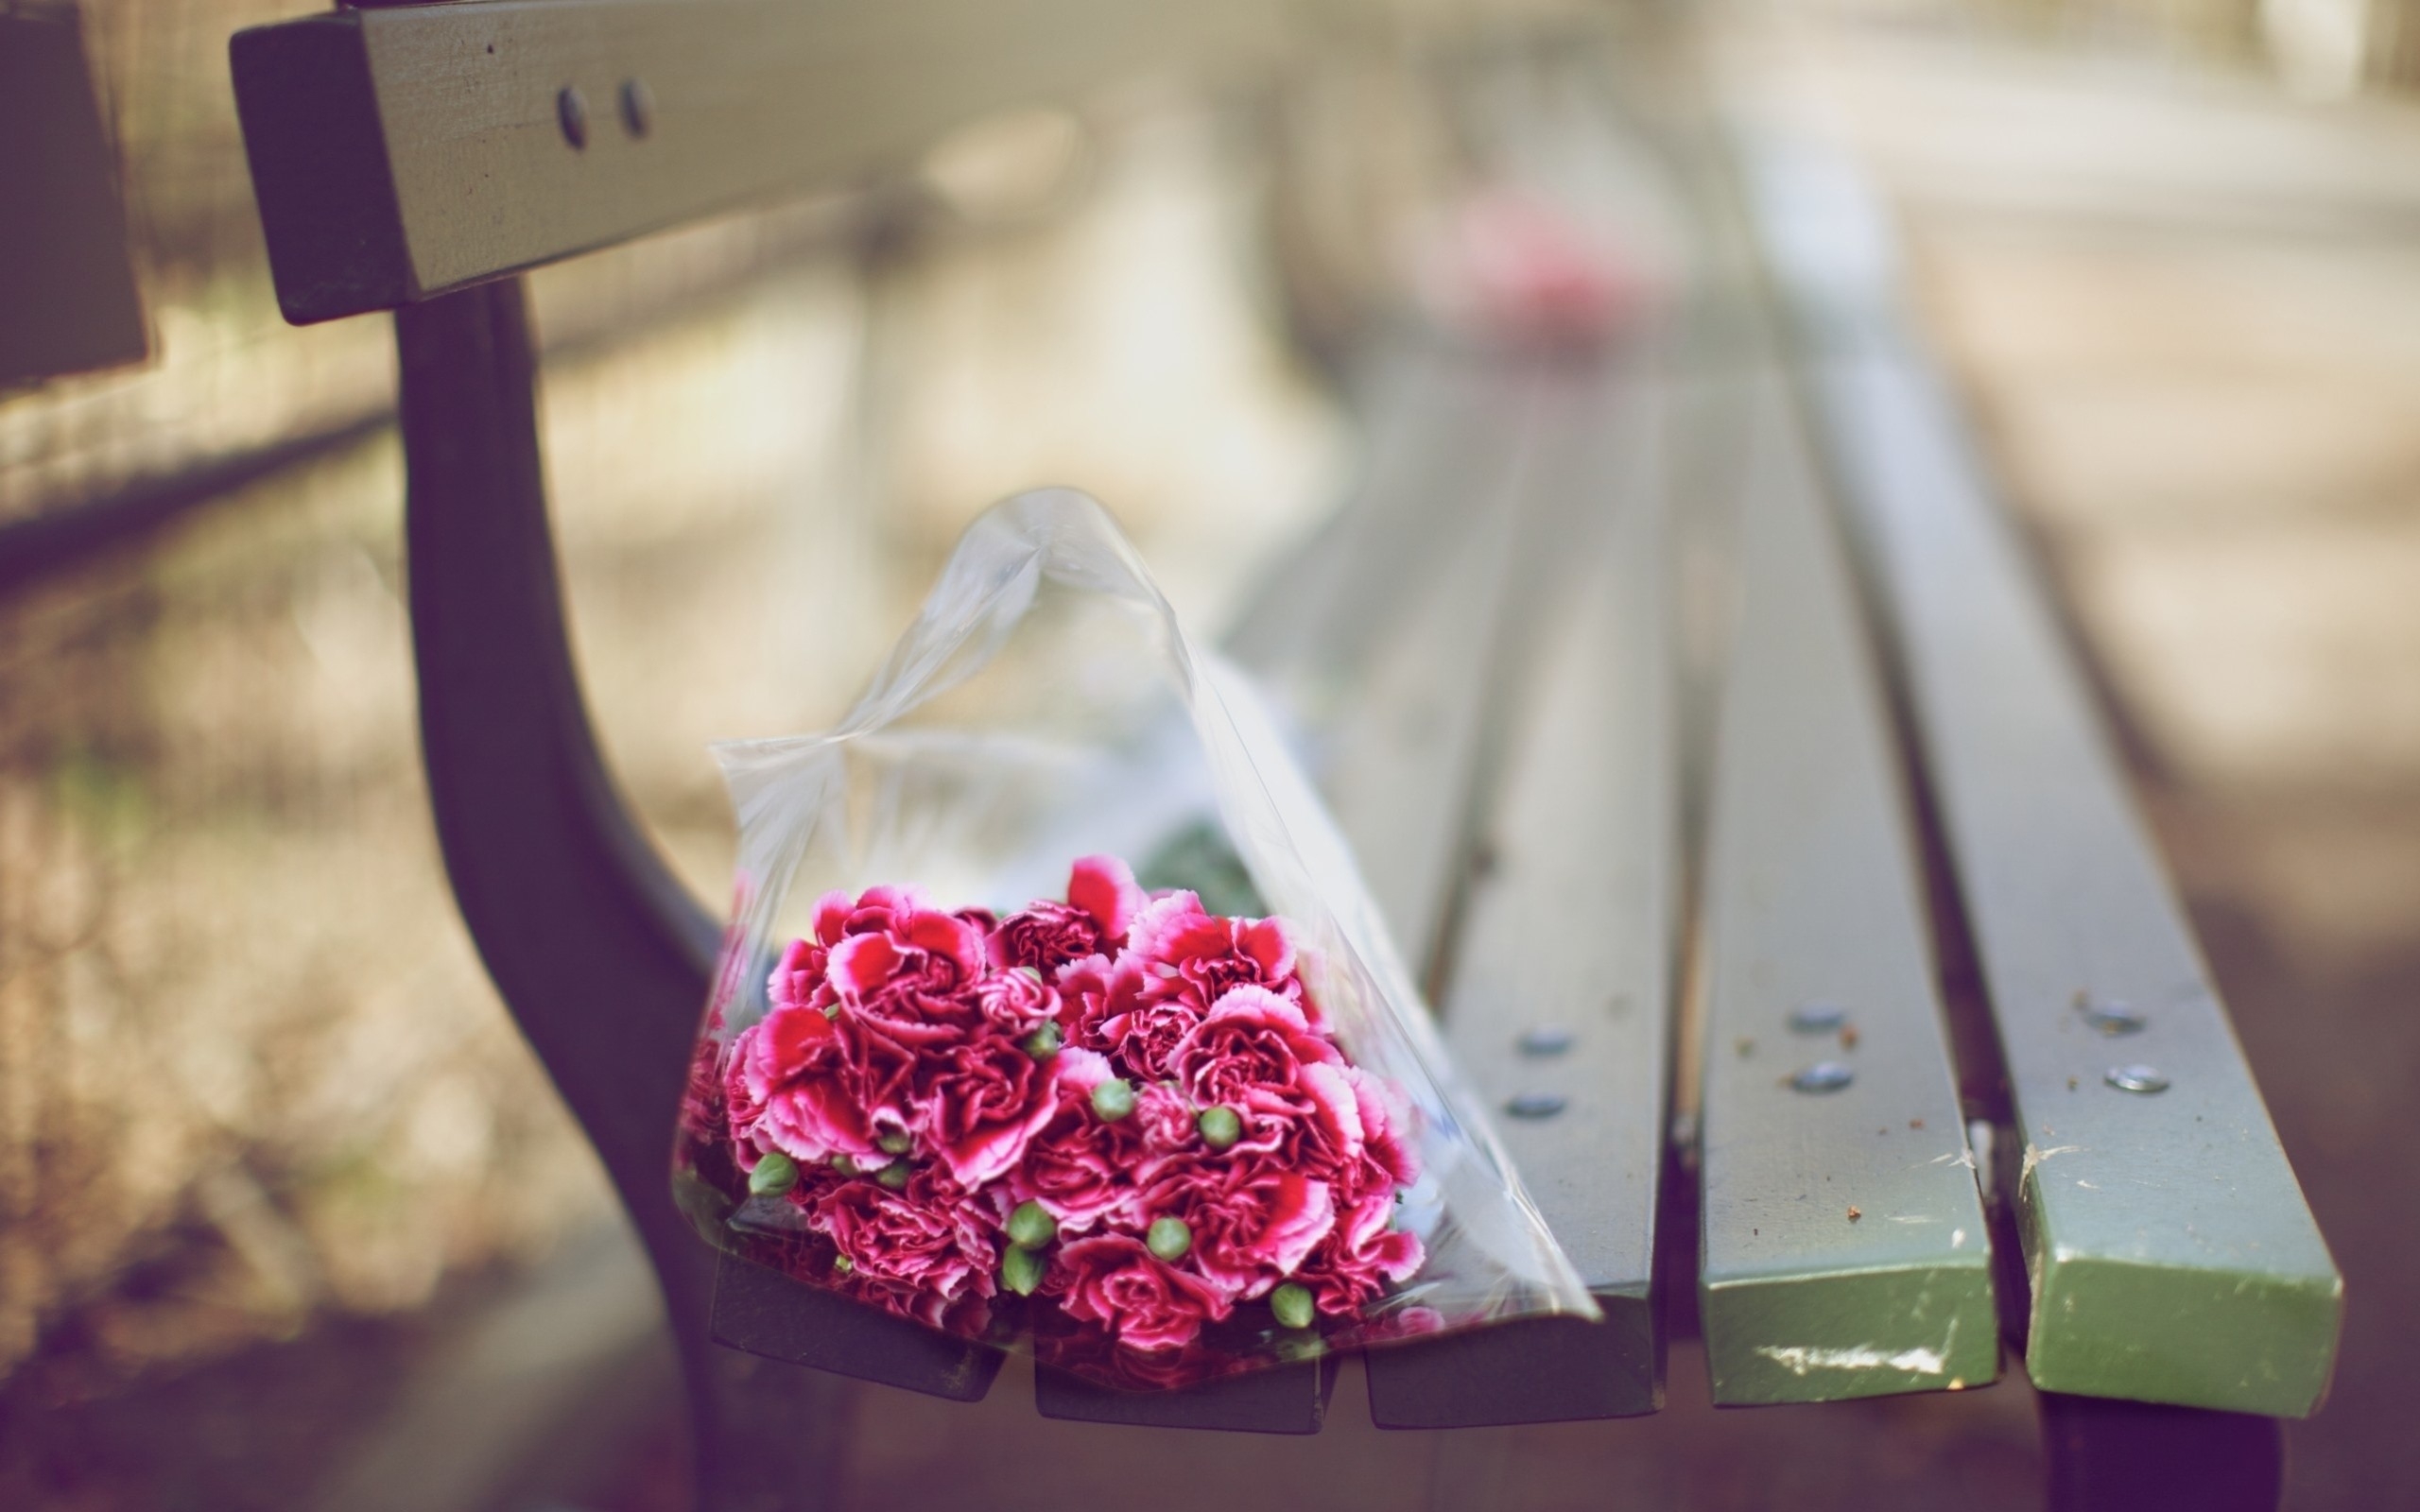 The red bouquet on the bench